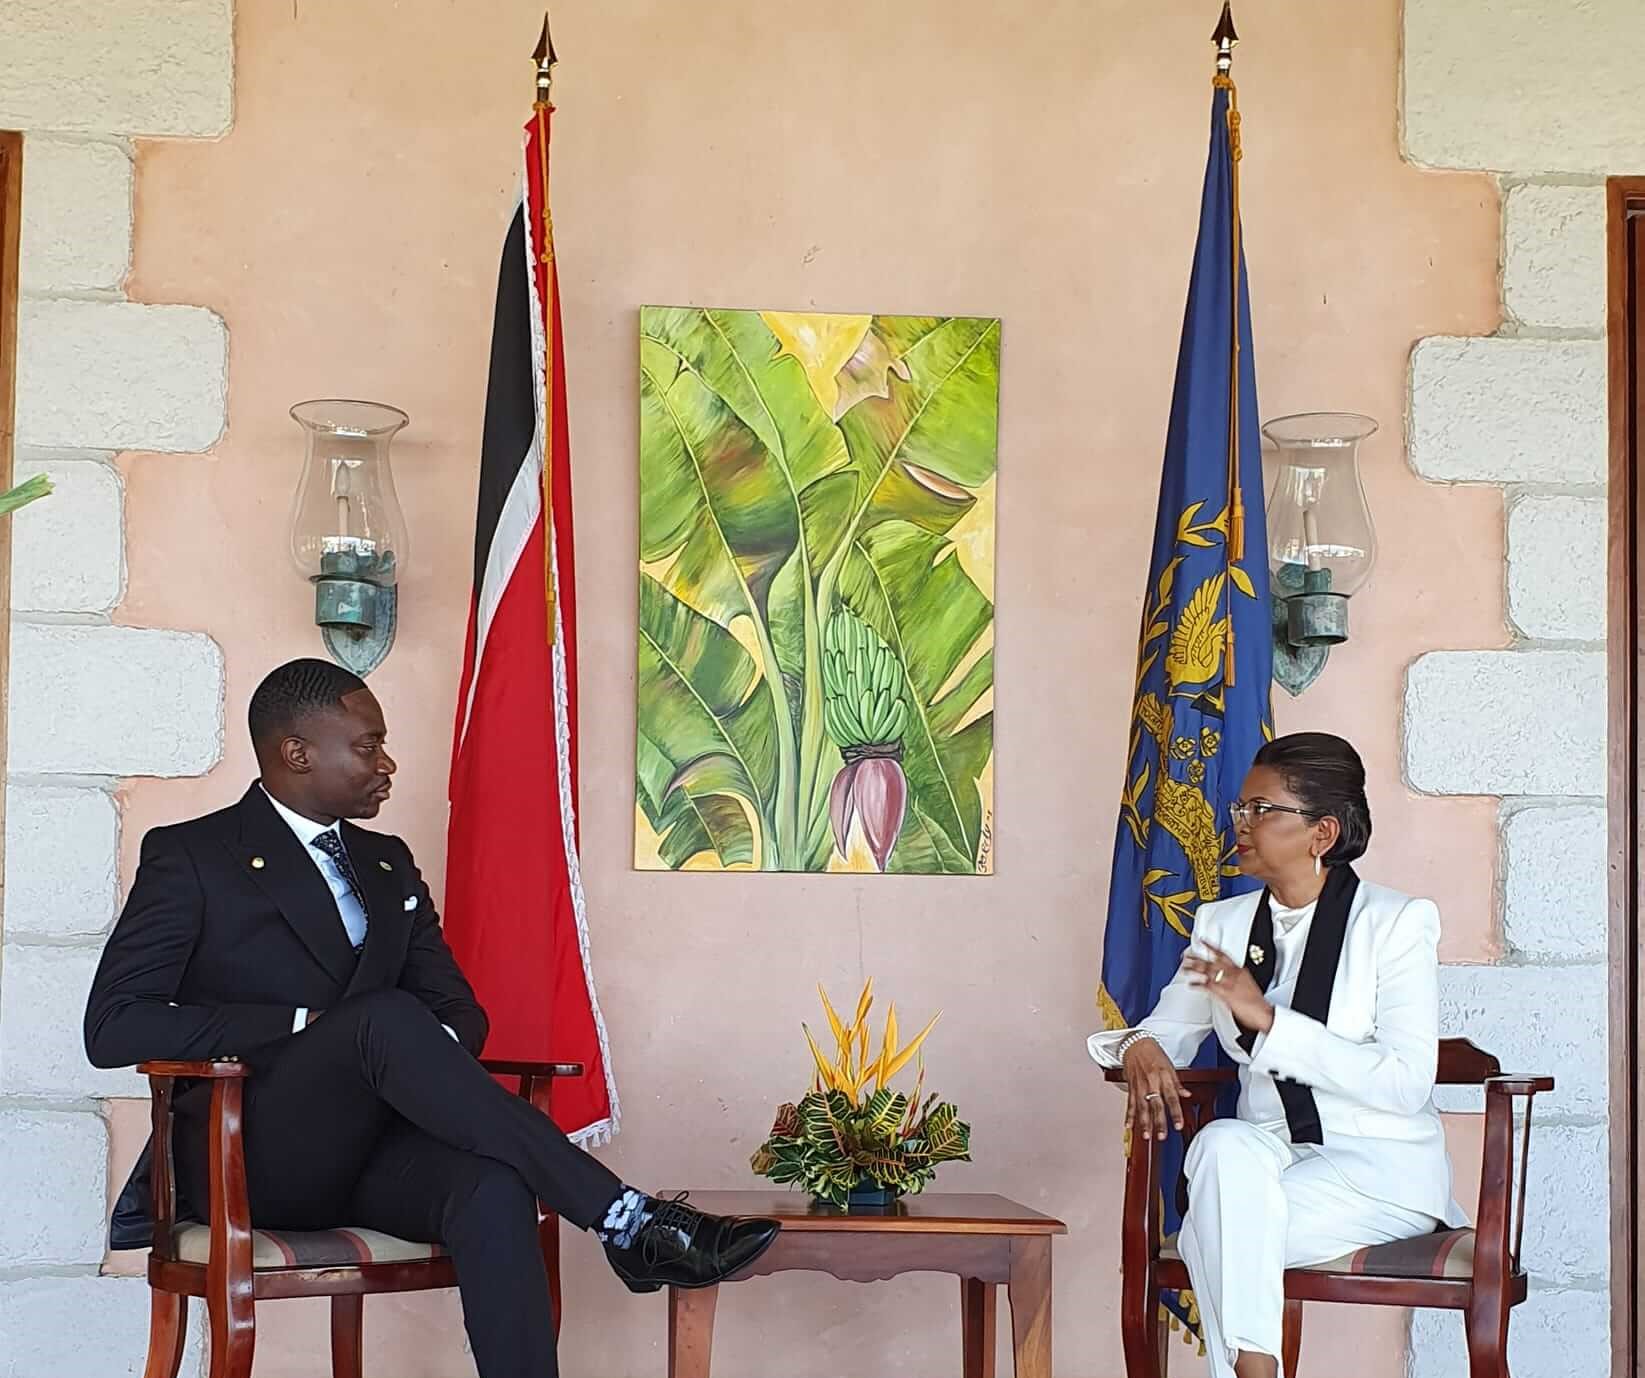 Her Excellency receives the Chief Secretary of the THA prior to Address